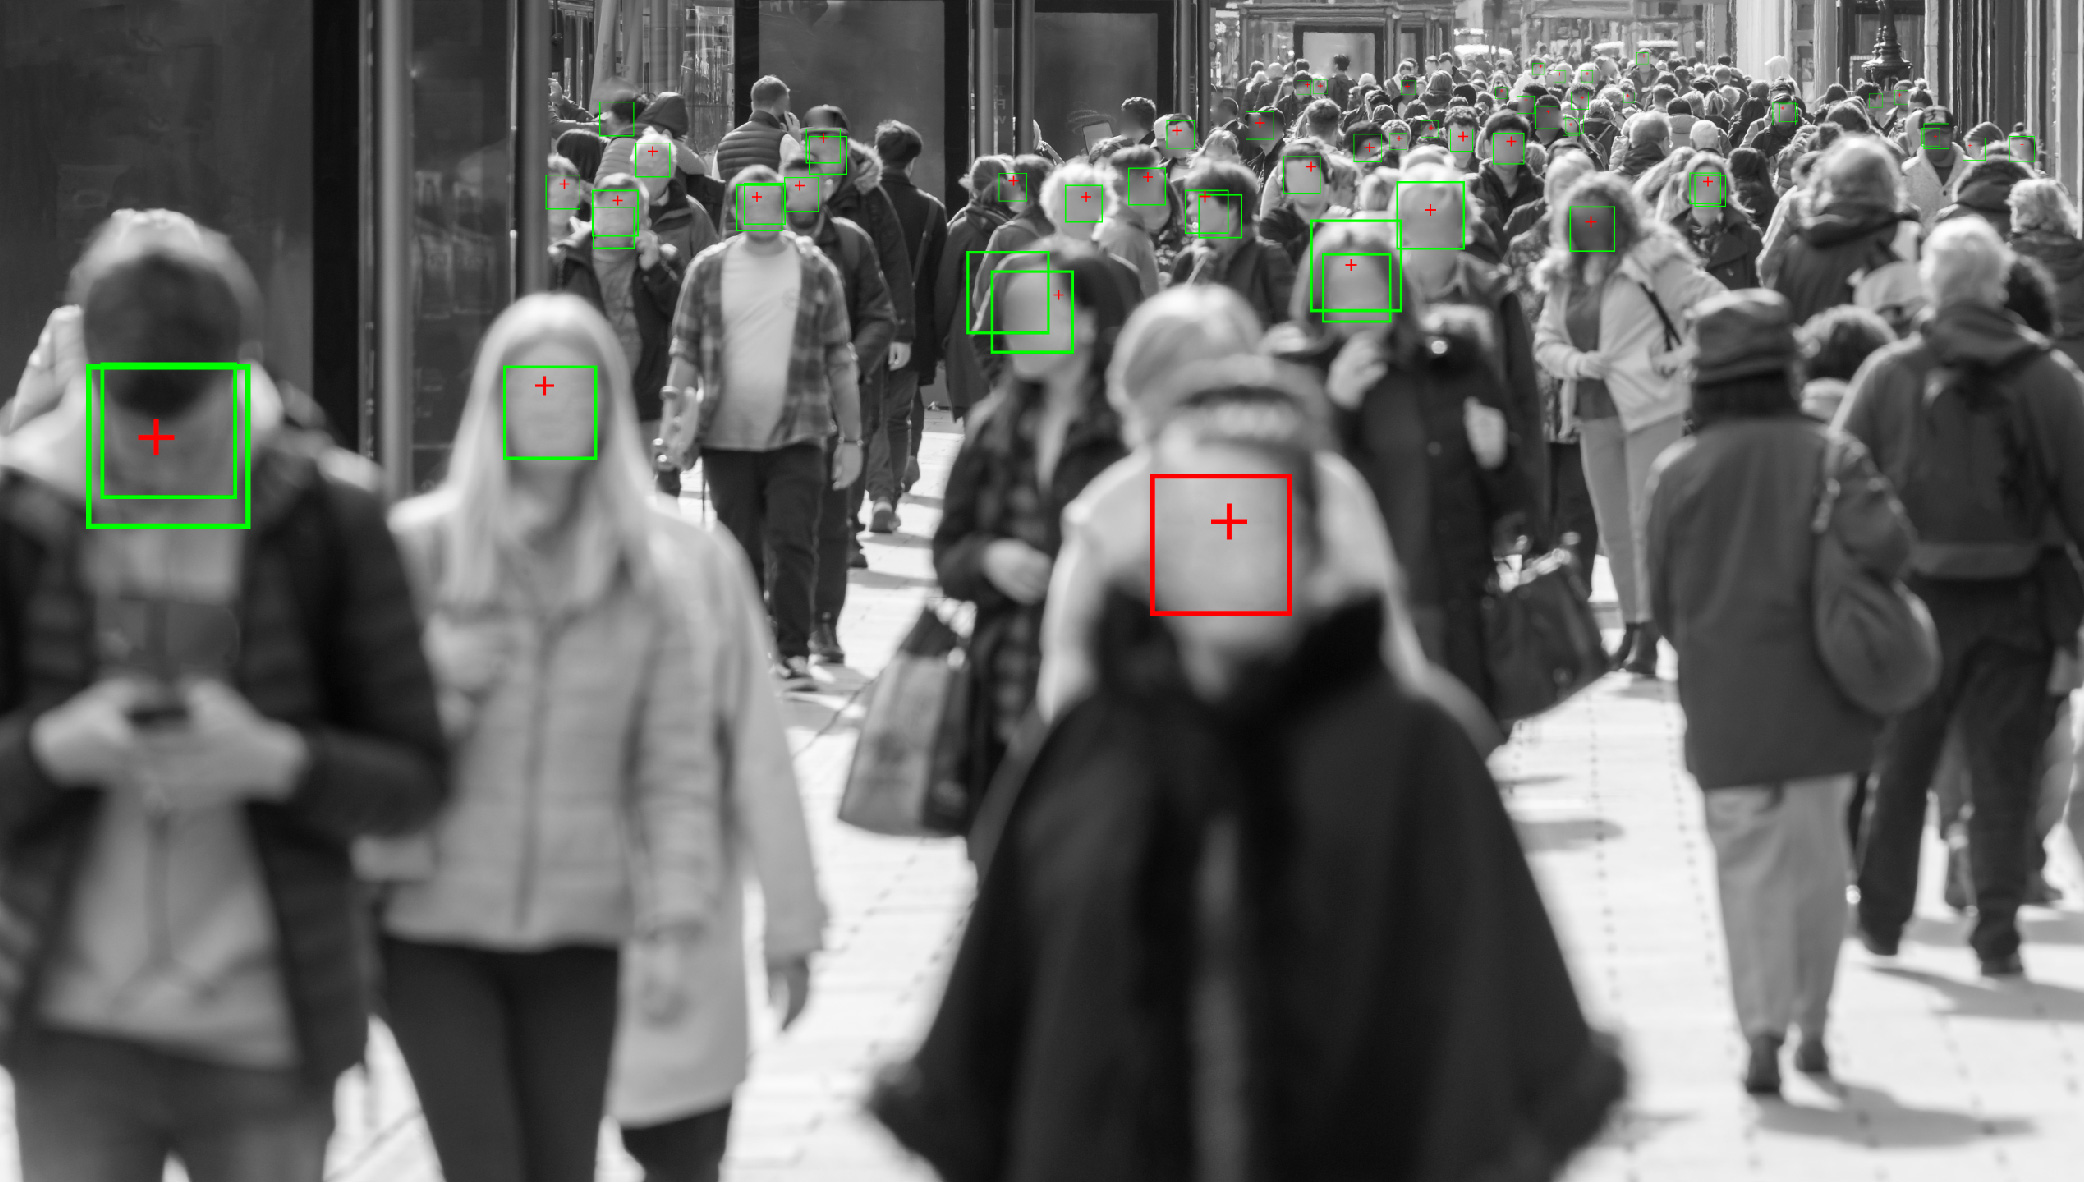 Footage from a surveillance camera showing facial recognition